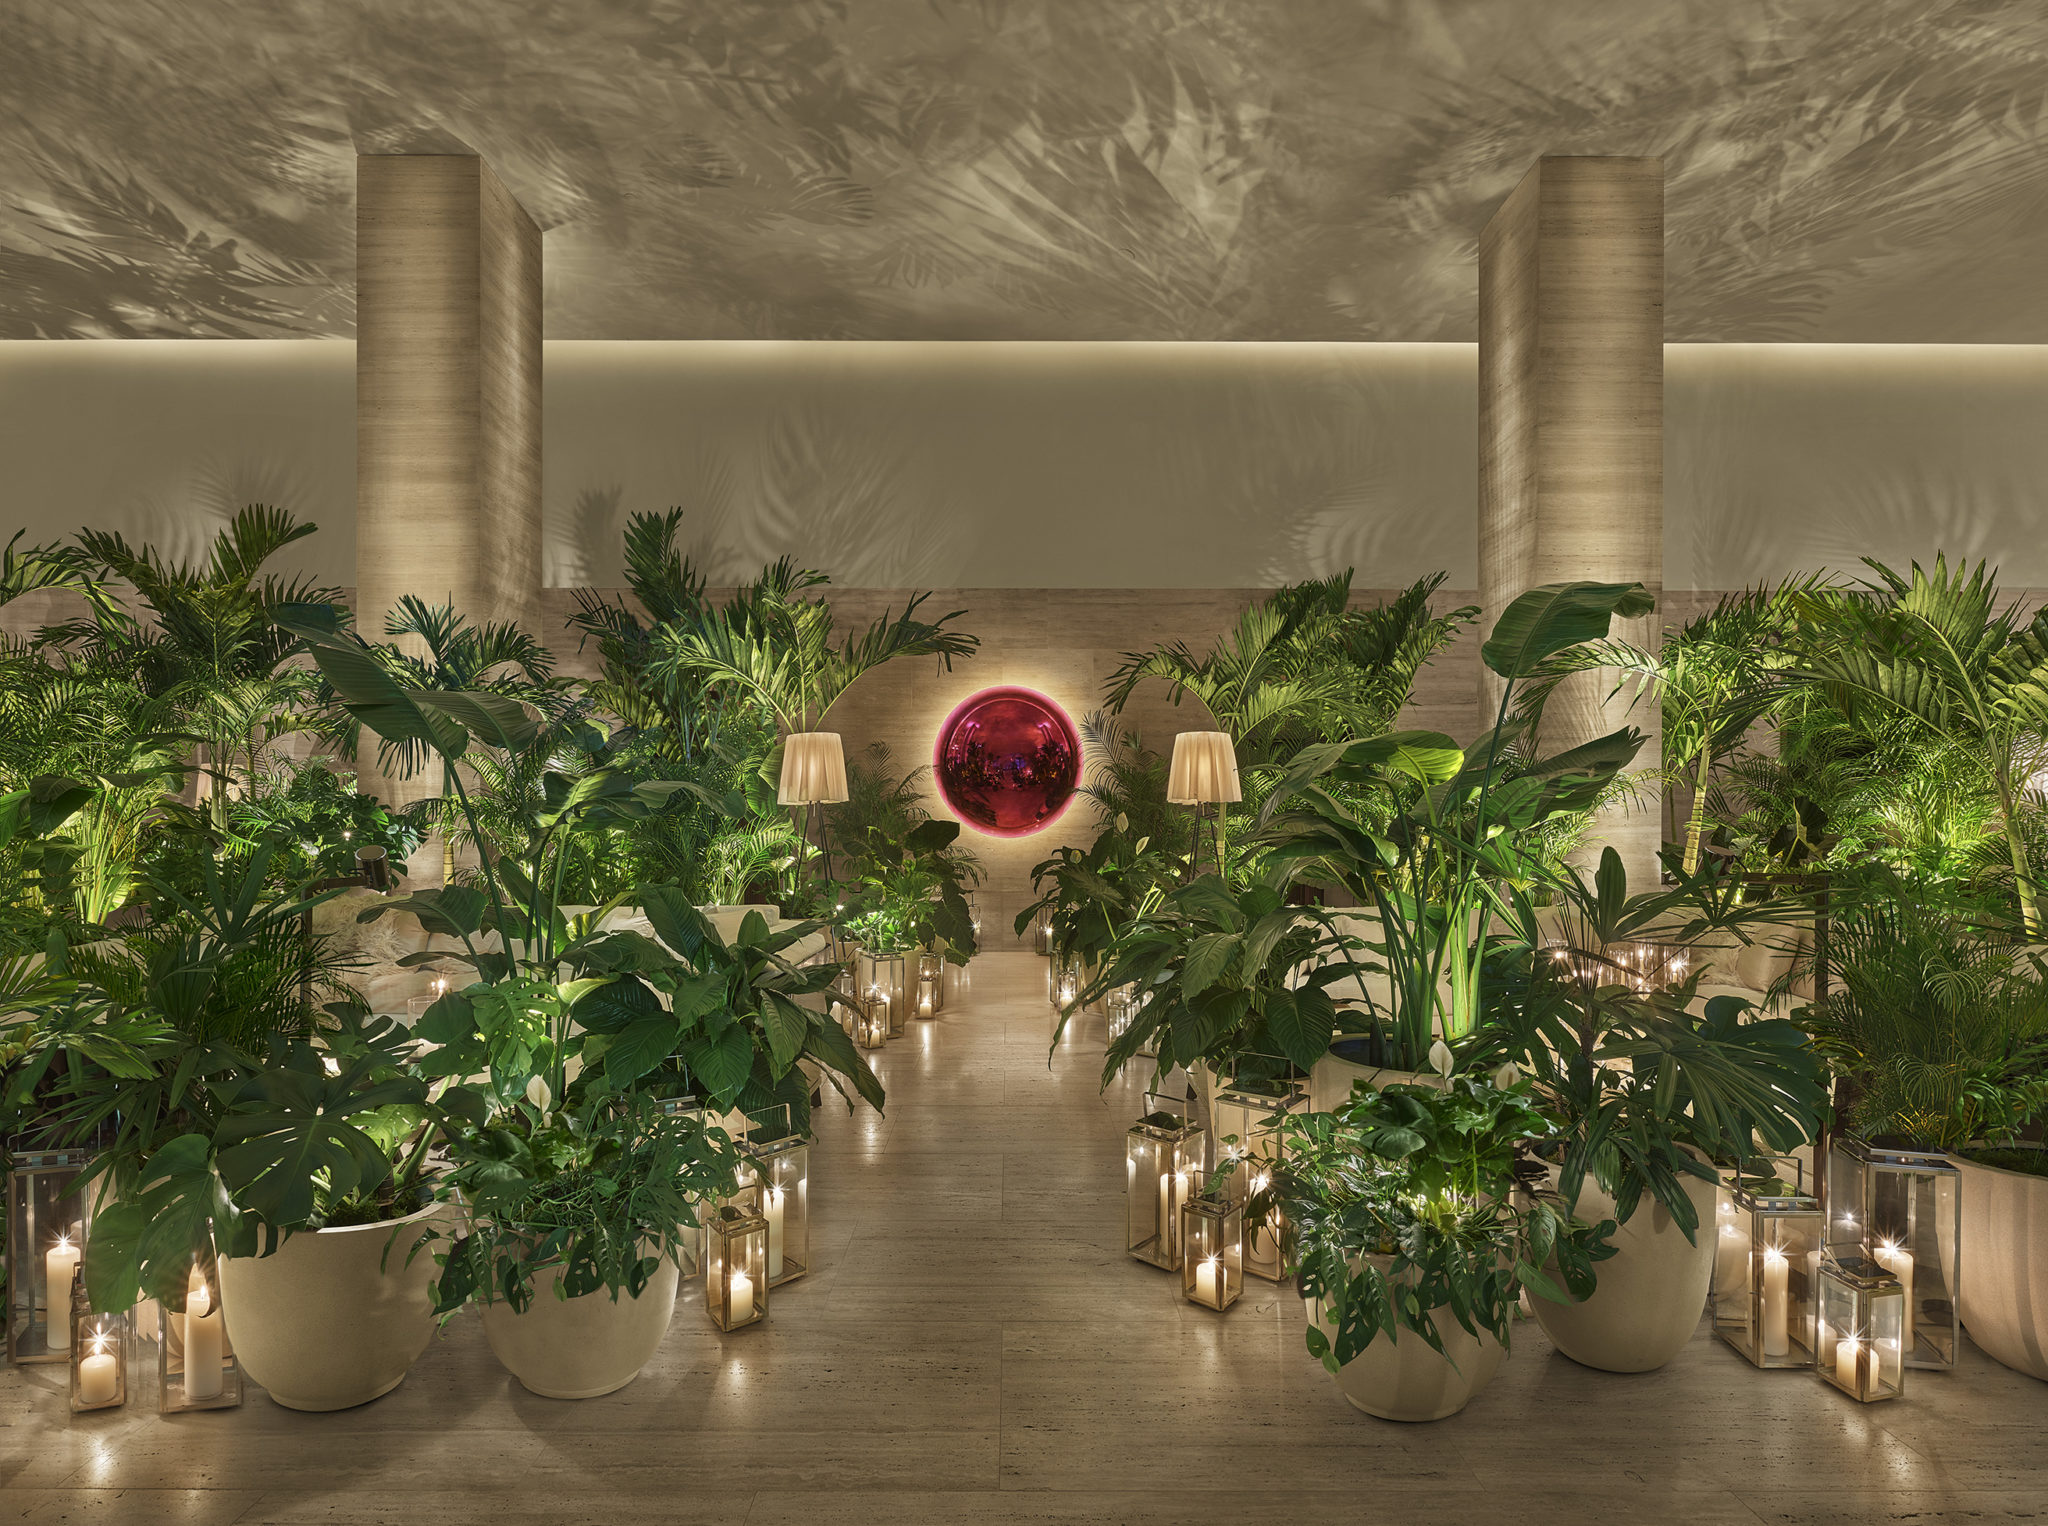 Lobby entrance lined with potted palms and glass encased candles